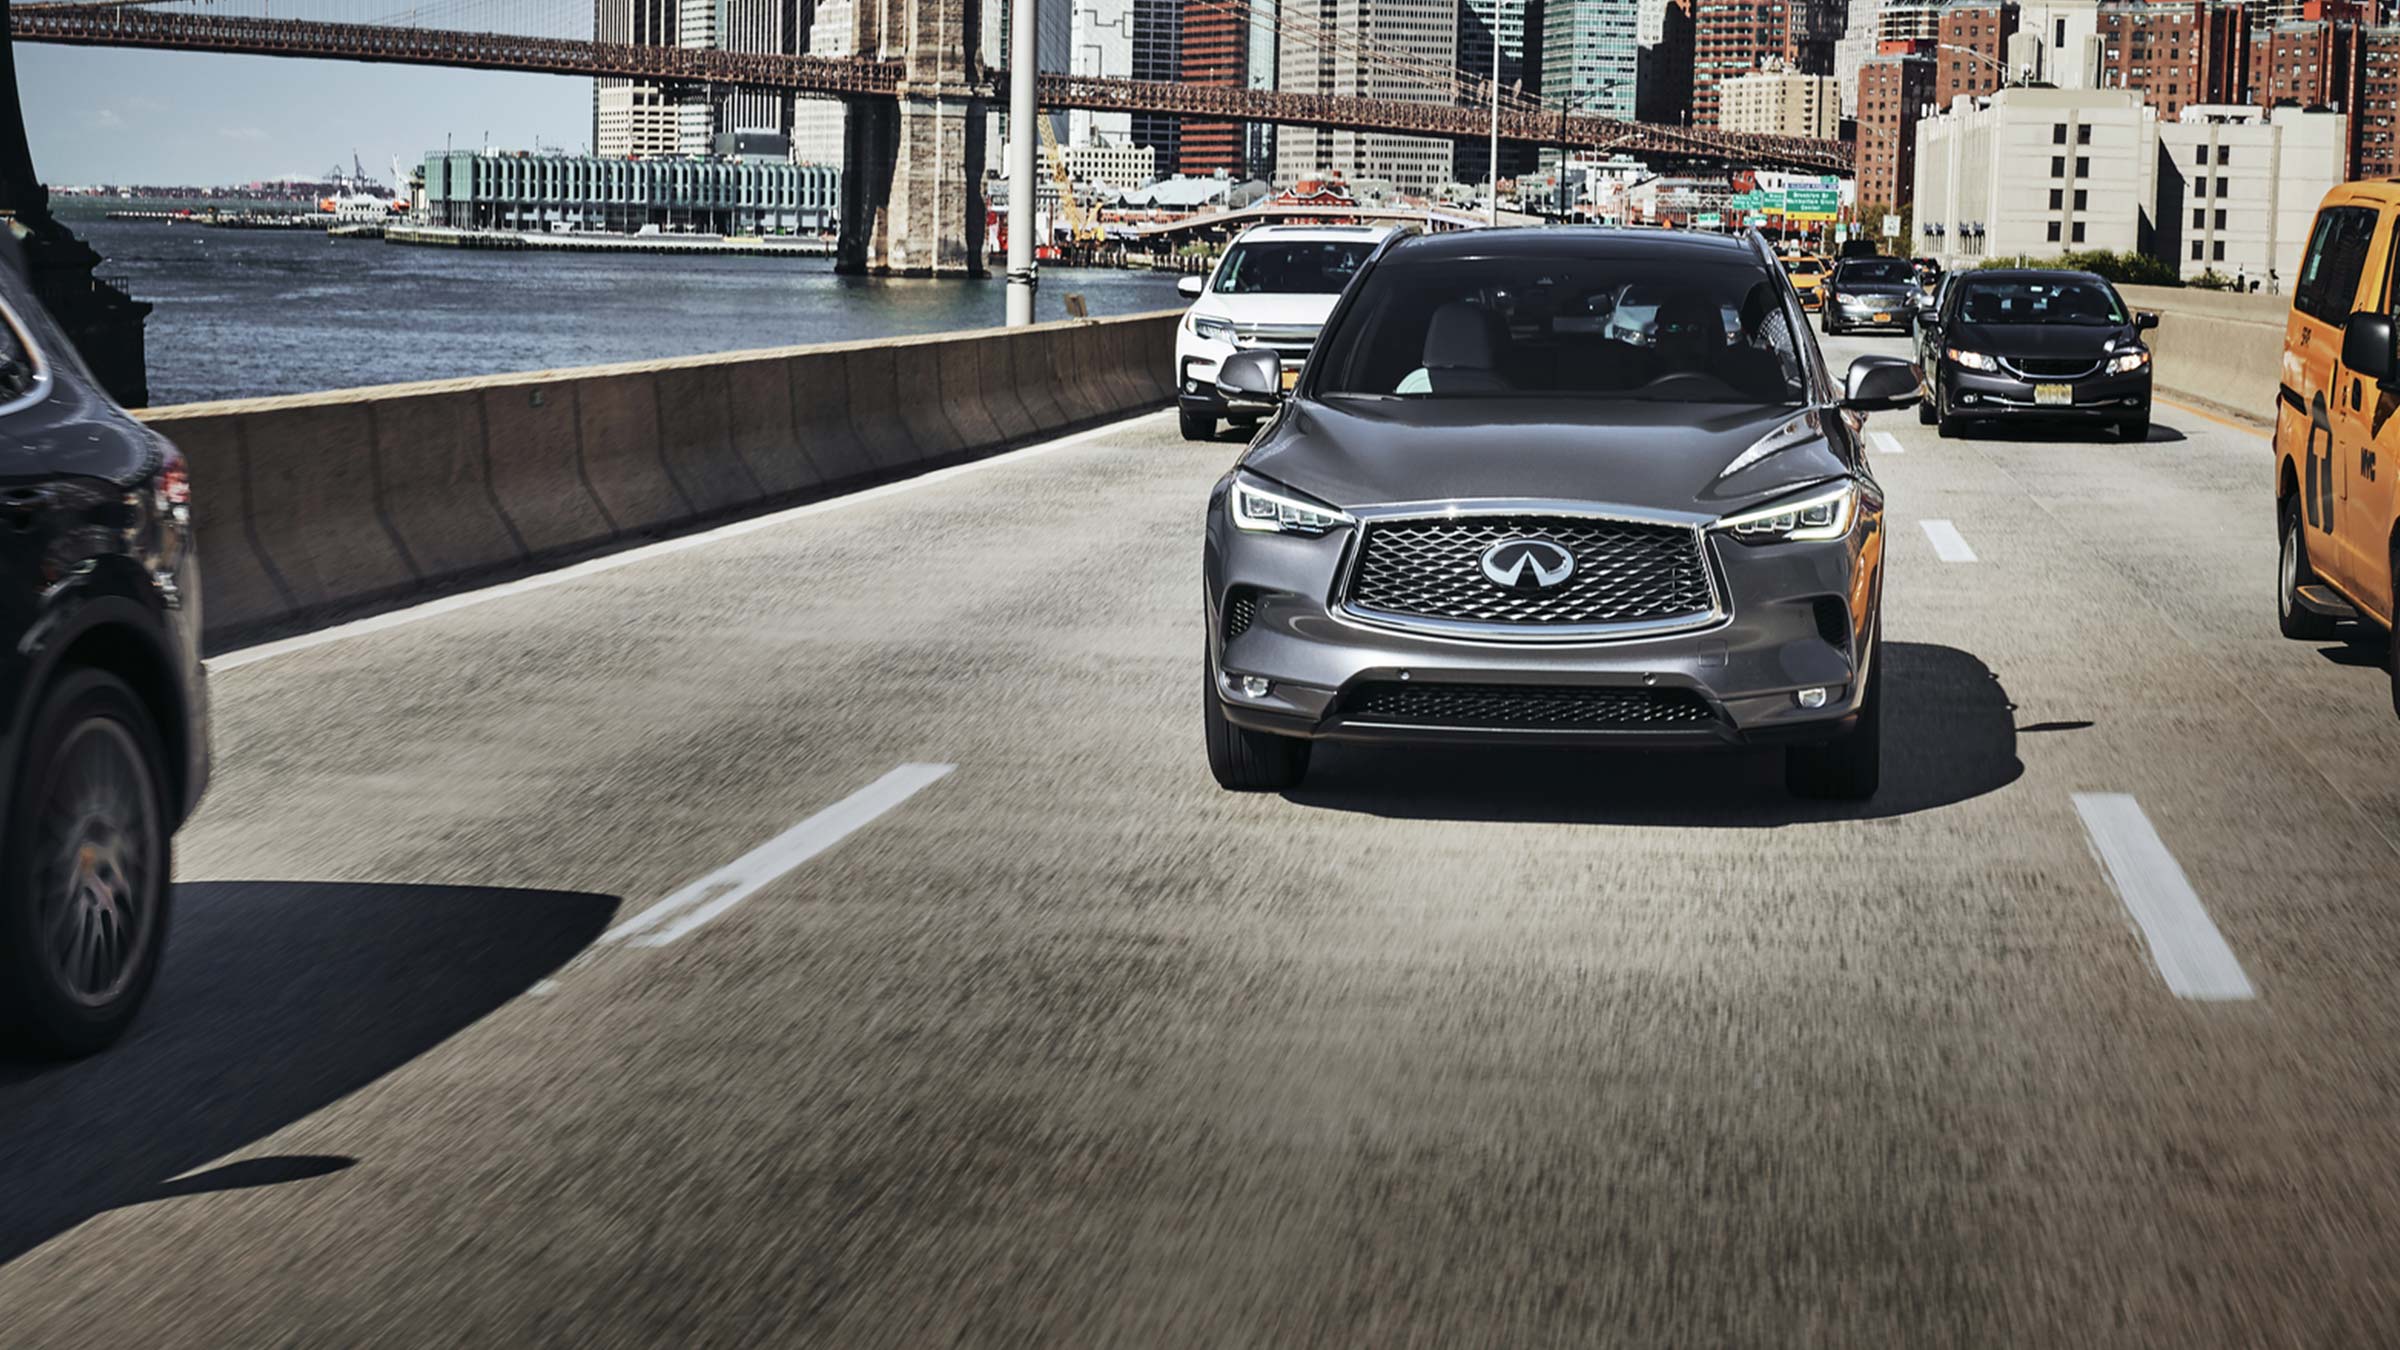 A front view of 2022 INFINITI QX50 SUV driving down a busy street.